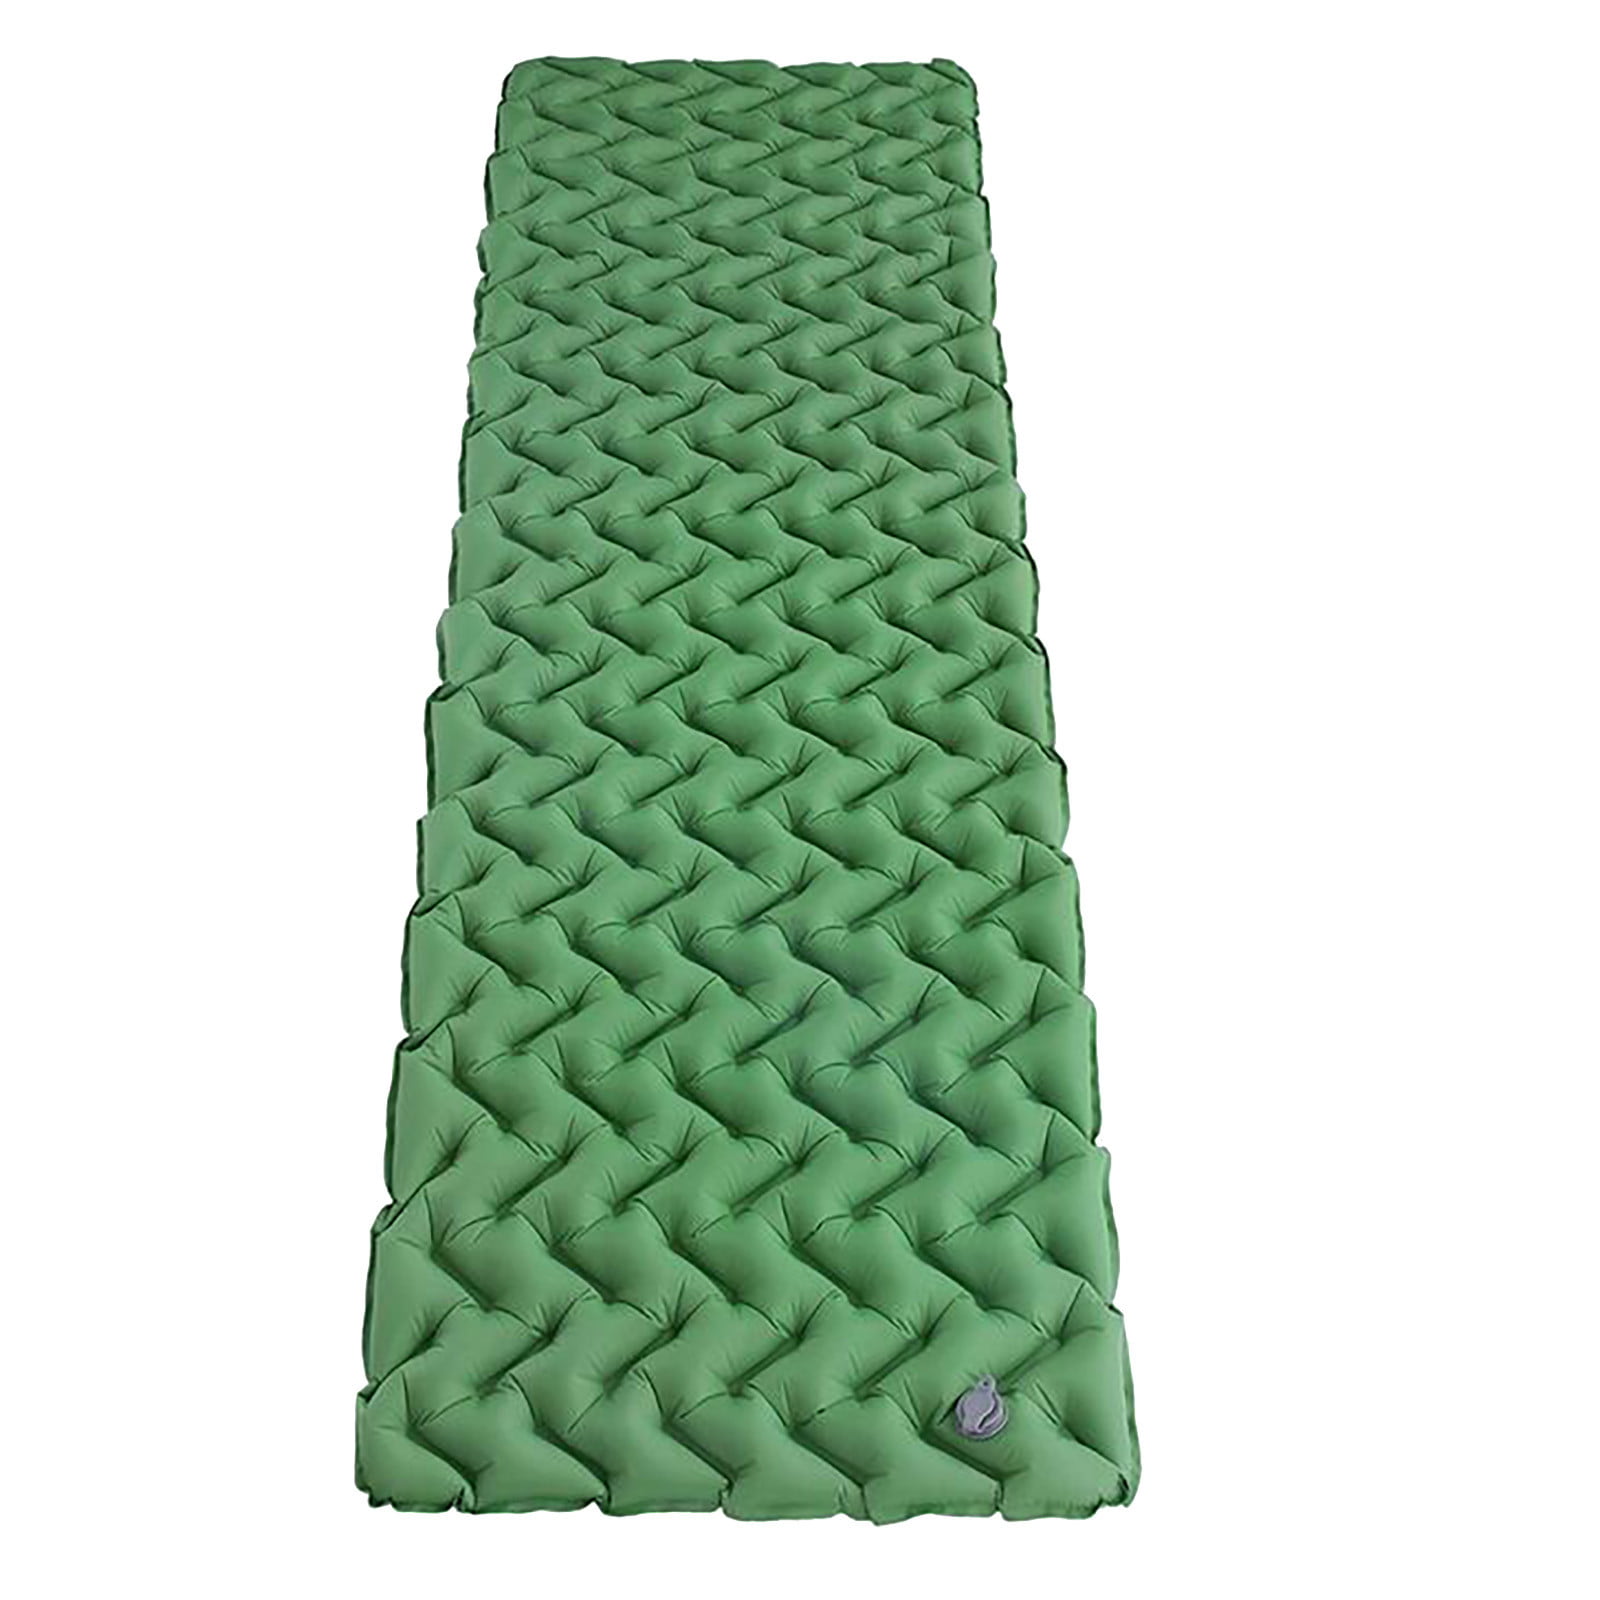 camping yeacher inflatable sleeping mat with pillow,camping mat ultra-light sleeping mat for backpacking hiking green